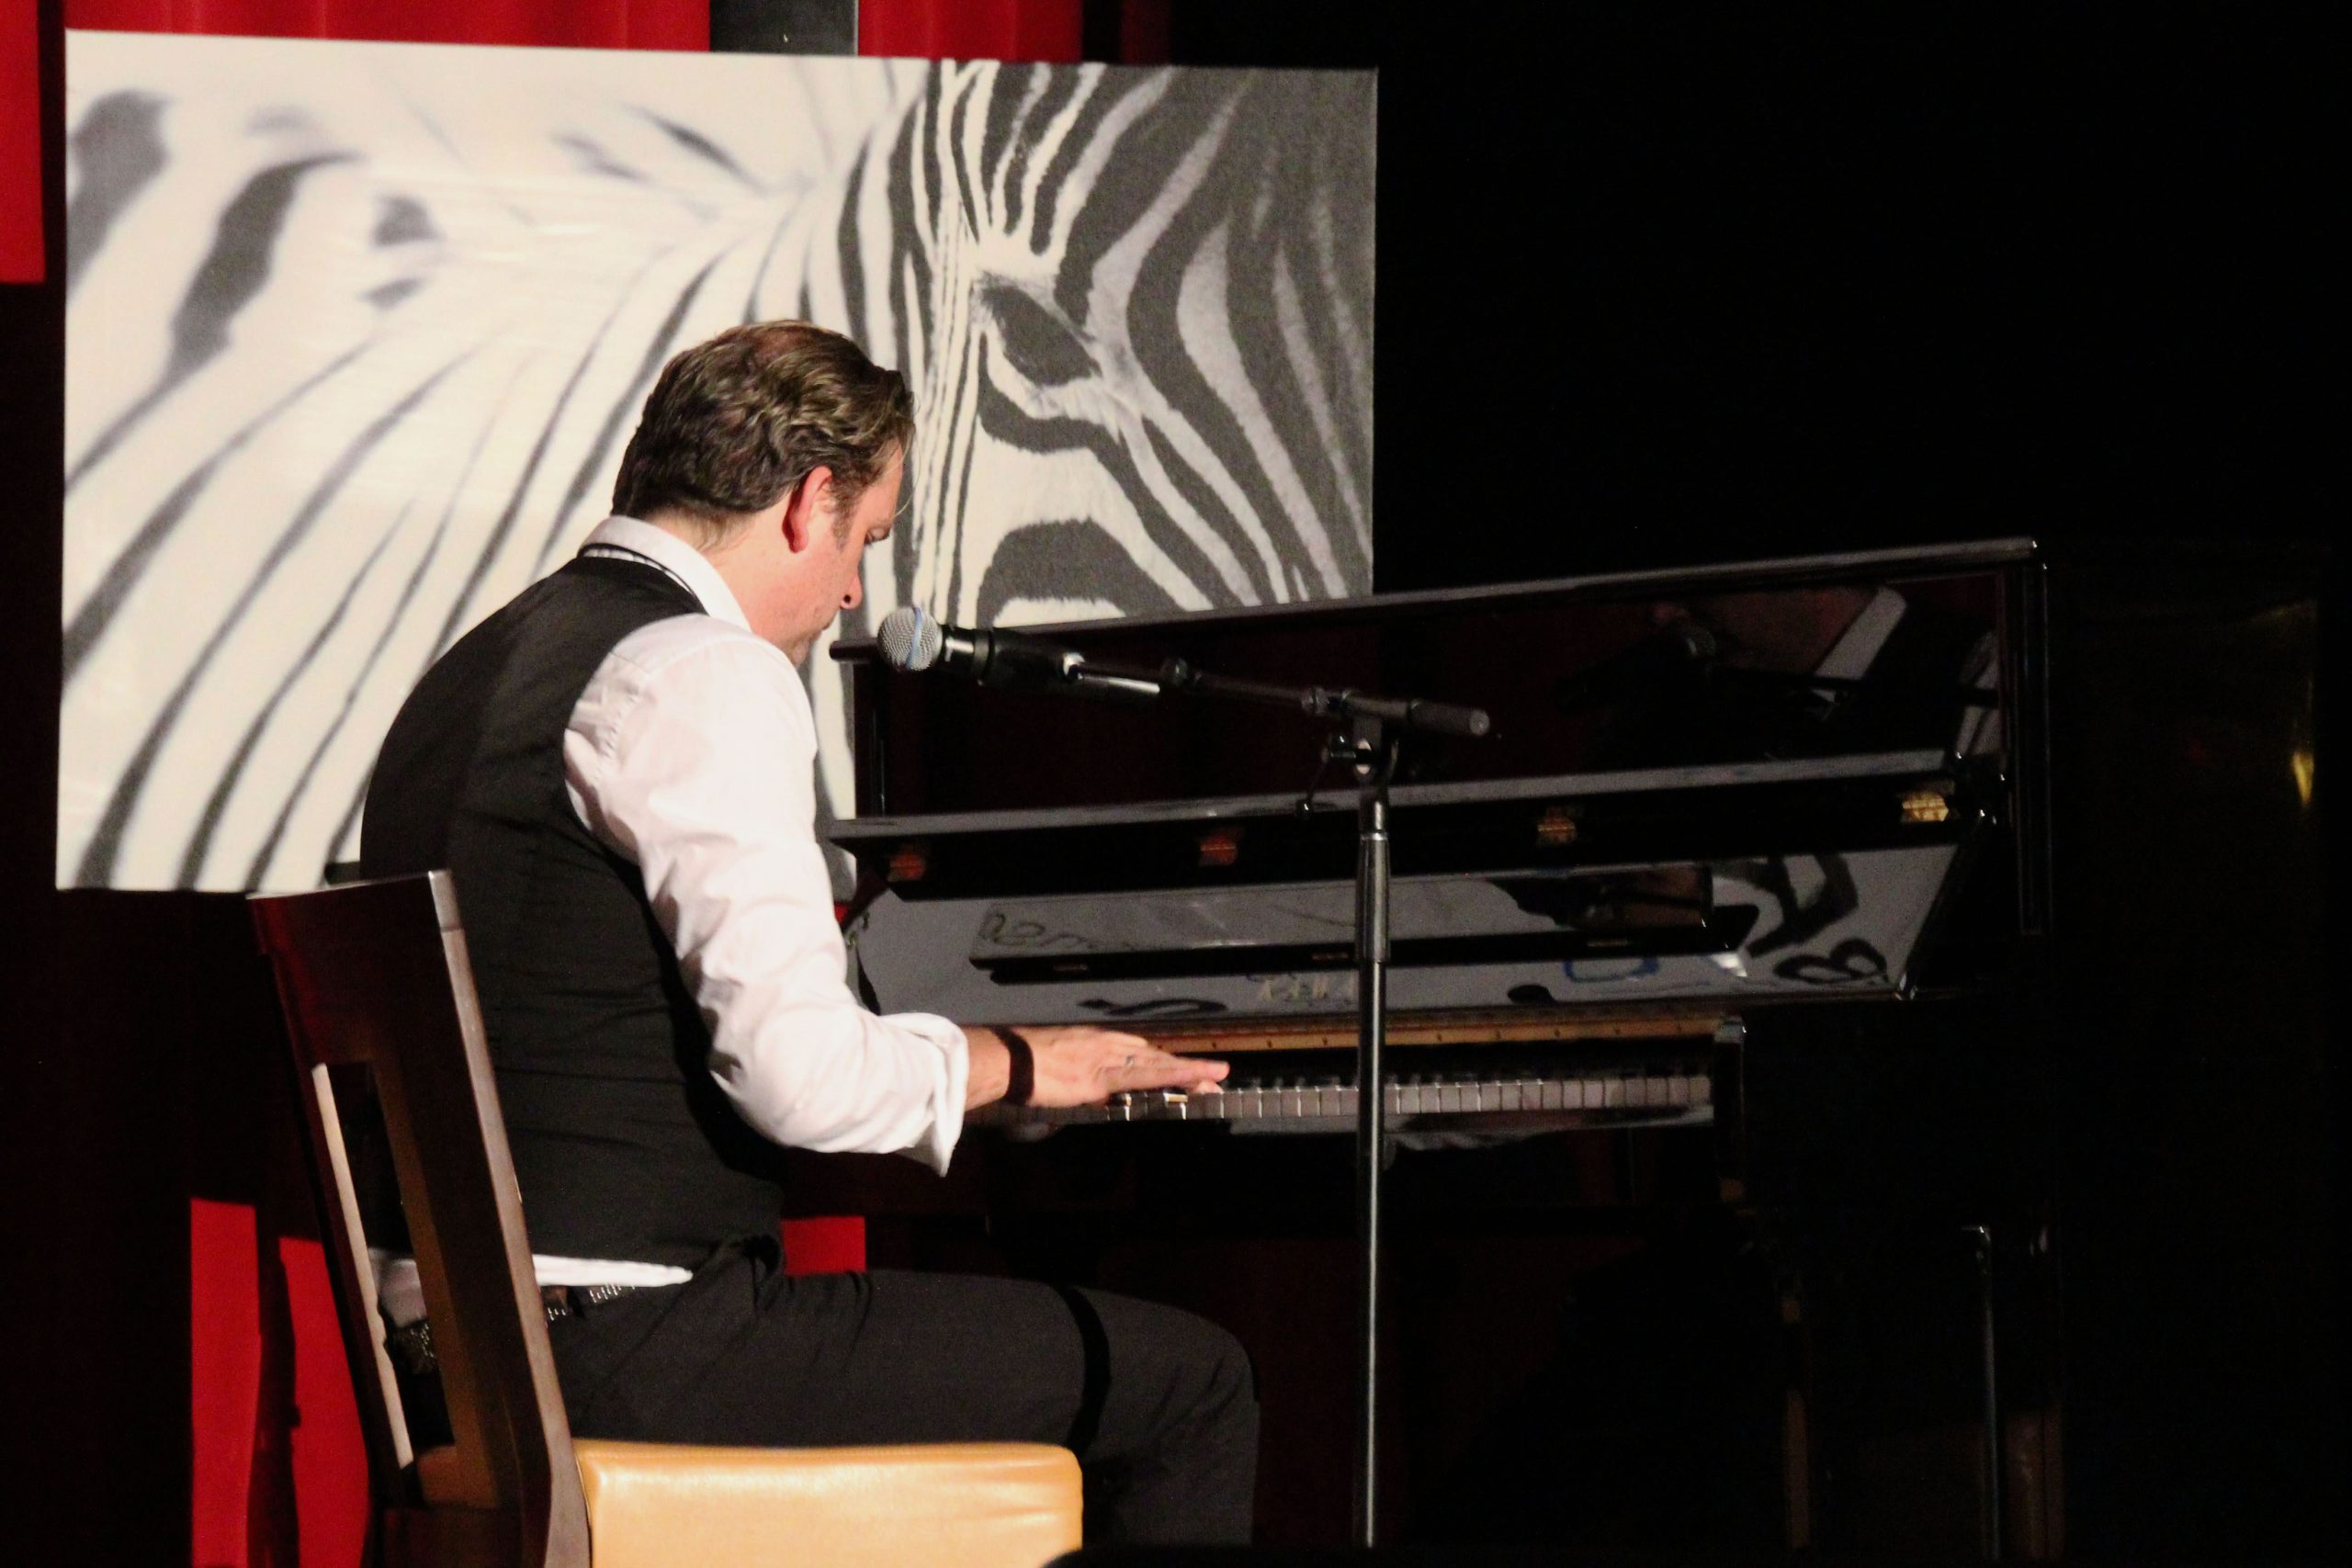 Featured Image for "Life as a Zebra Foundation Benefit Concerts"